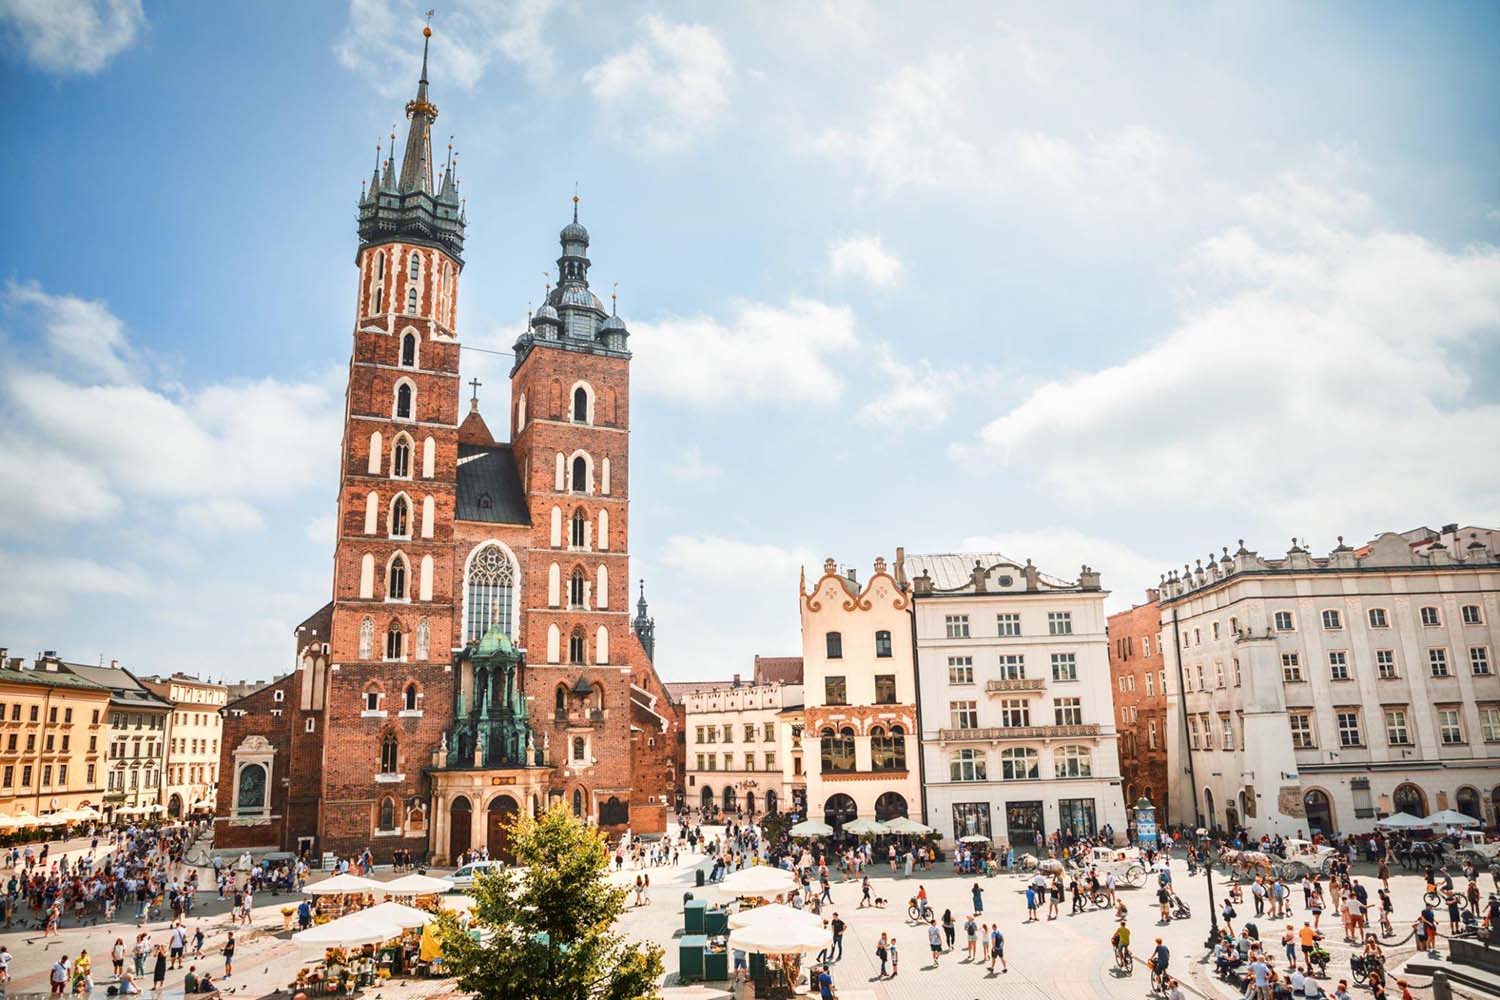 Things to Do in Krakow, Have You Thought About a Shooting Range?